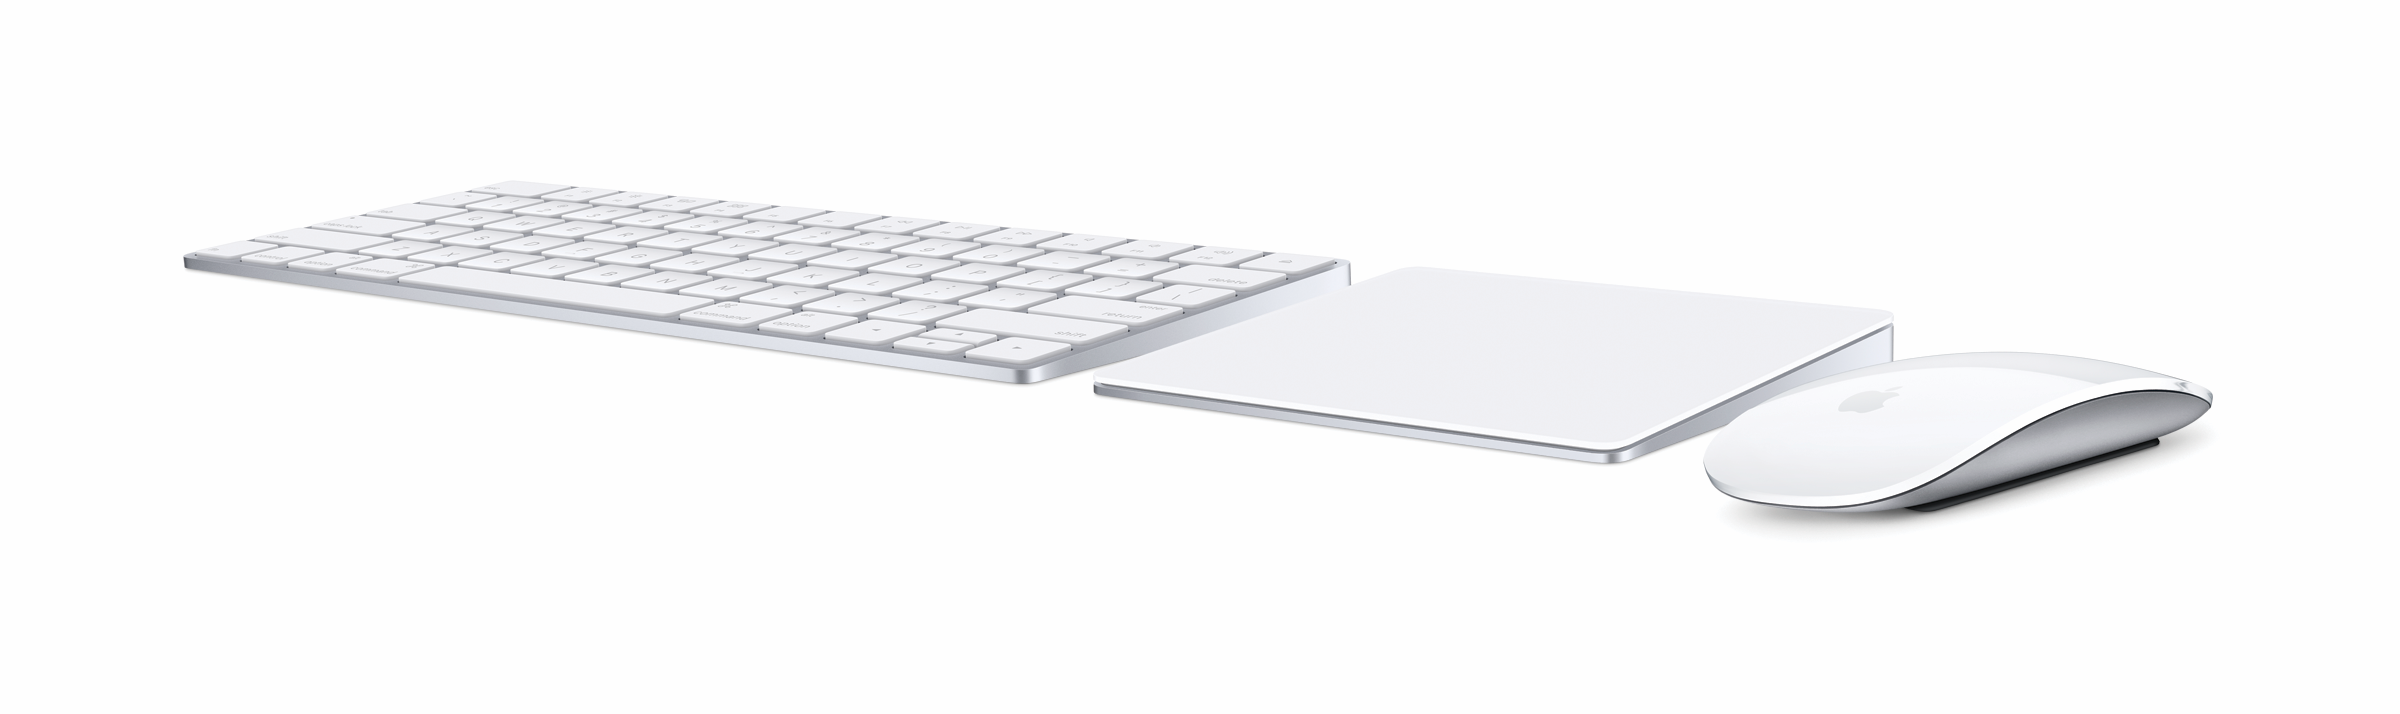 Keyboard, Trackpad and Mouse